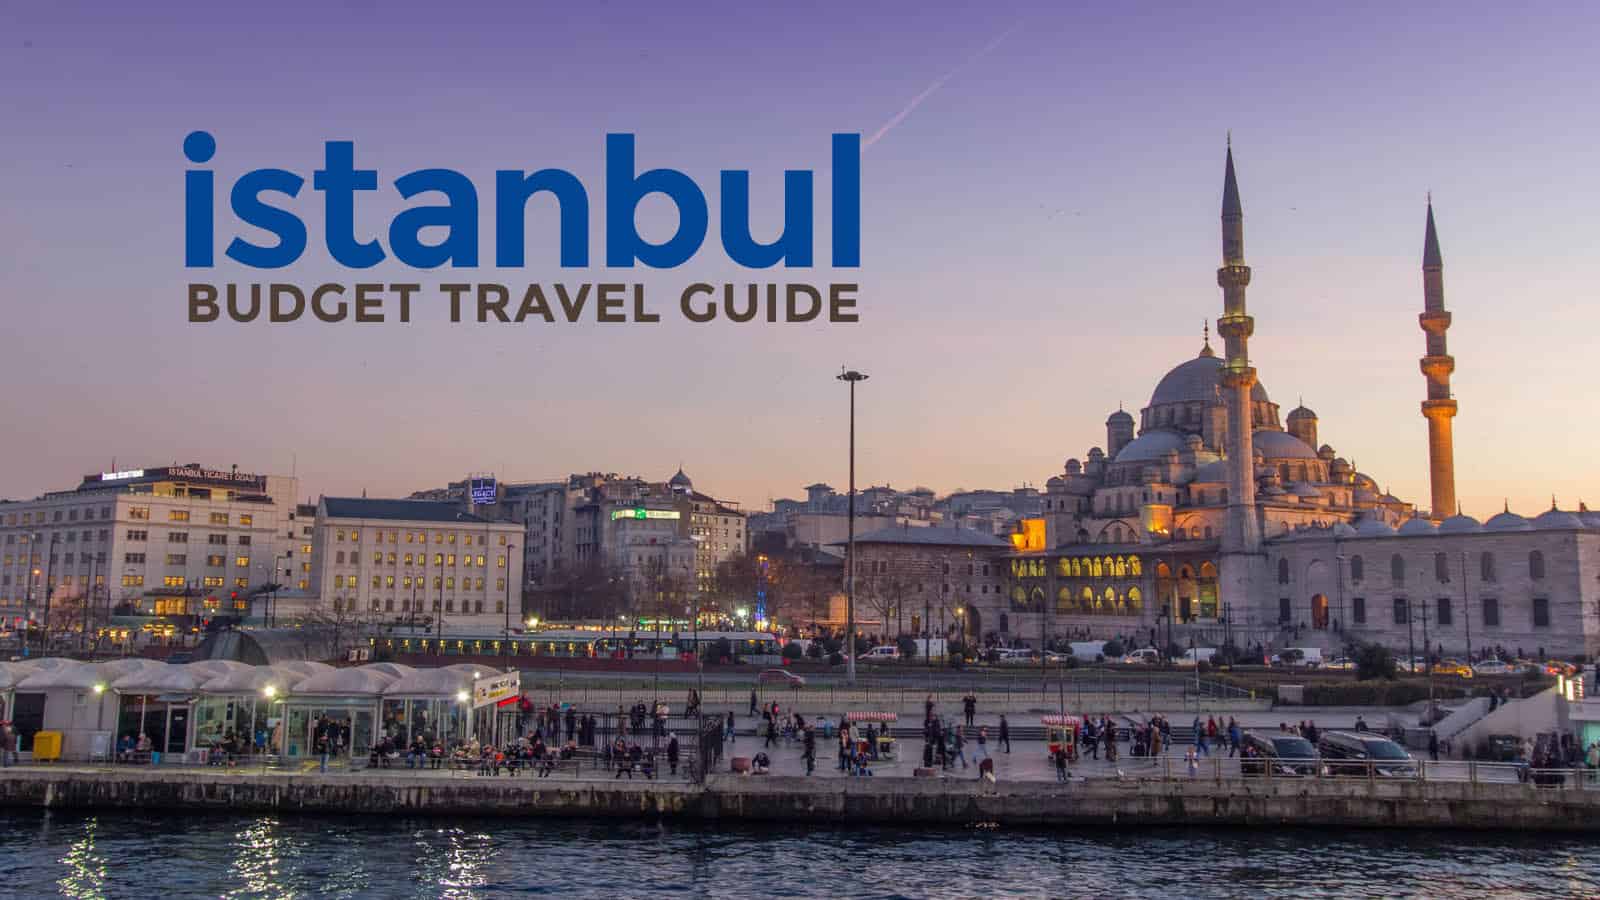 Istanbul On A Budget Travel Guide Itinerary The Poor Traveler Images, Photos, Reviews